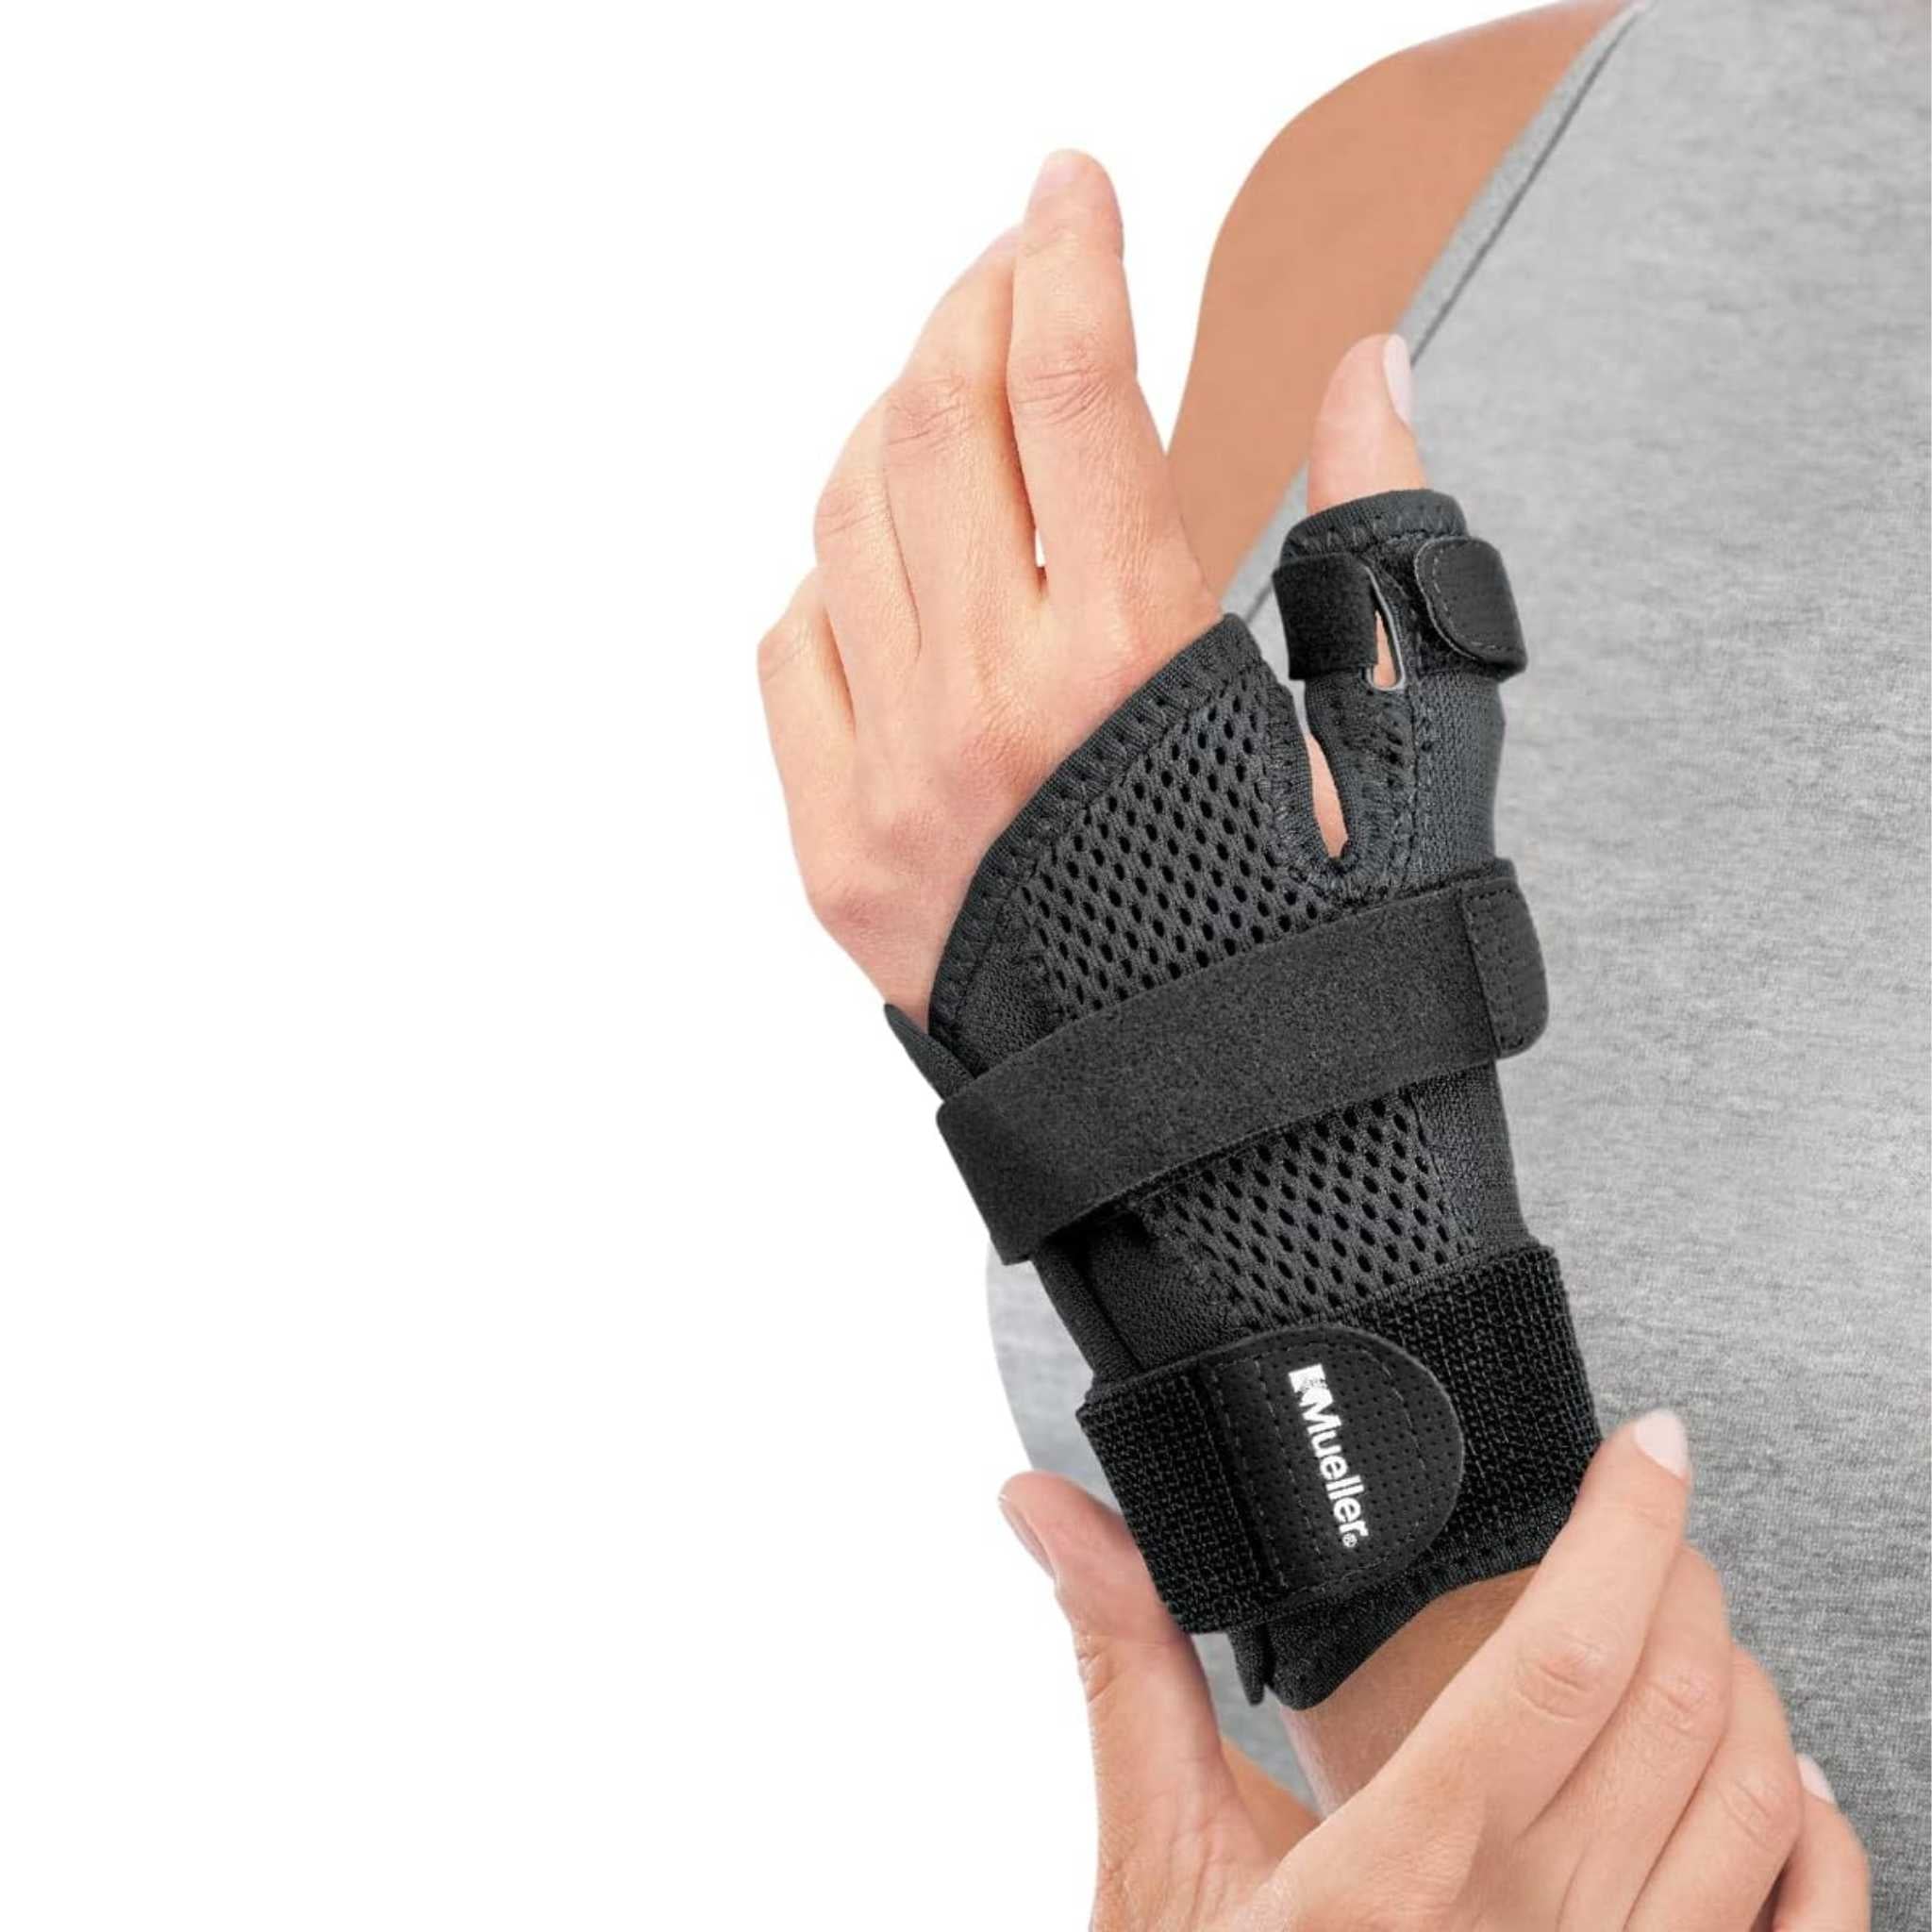 Mueller® Reversible Thumb Stabilizer, Unisex, One Size Fits Most - Black